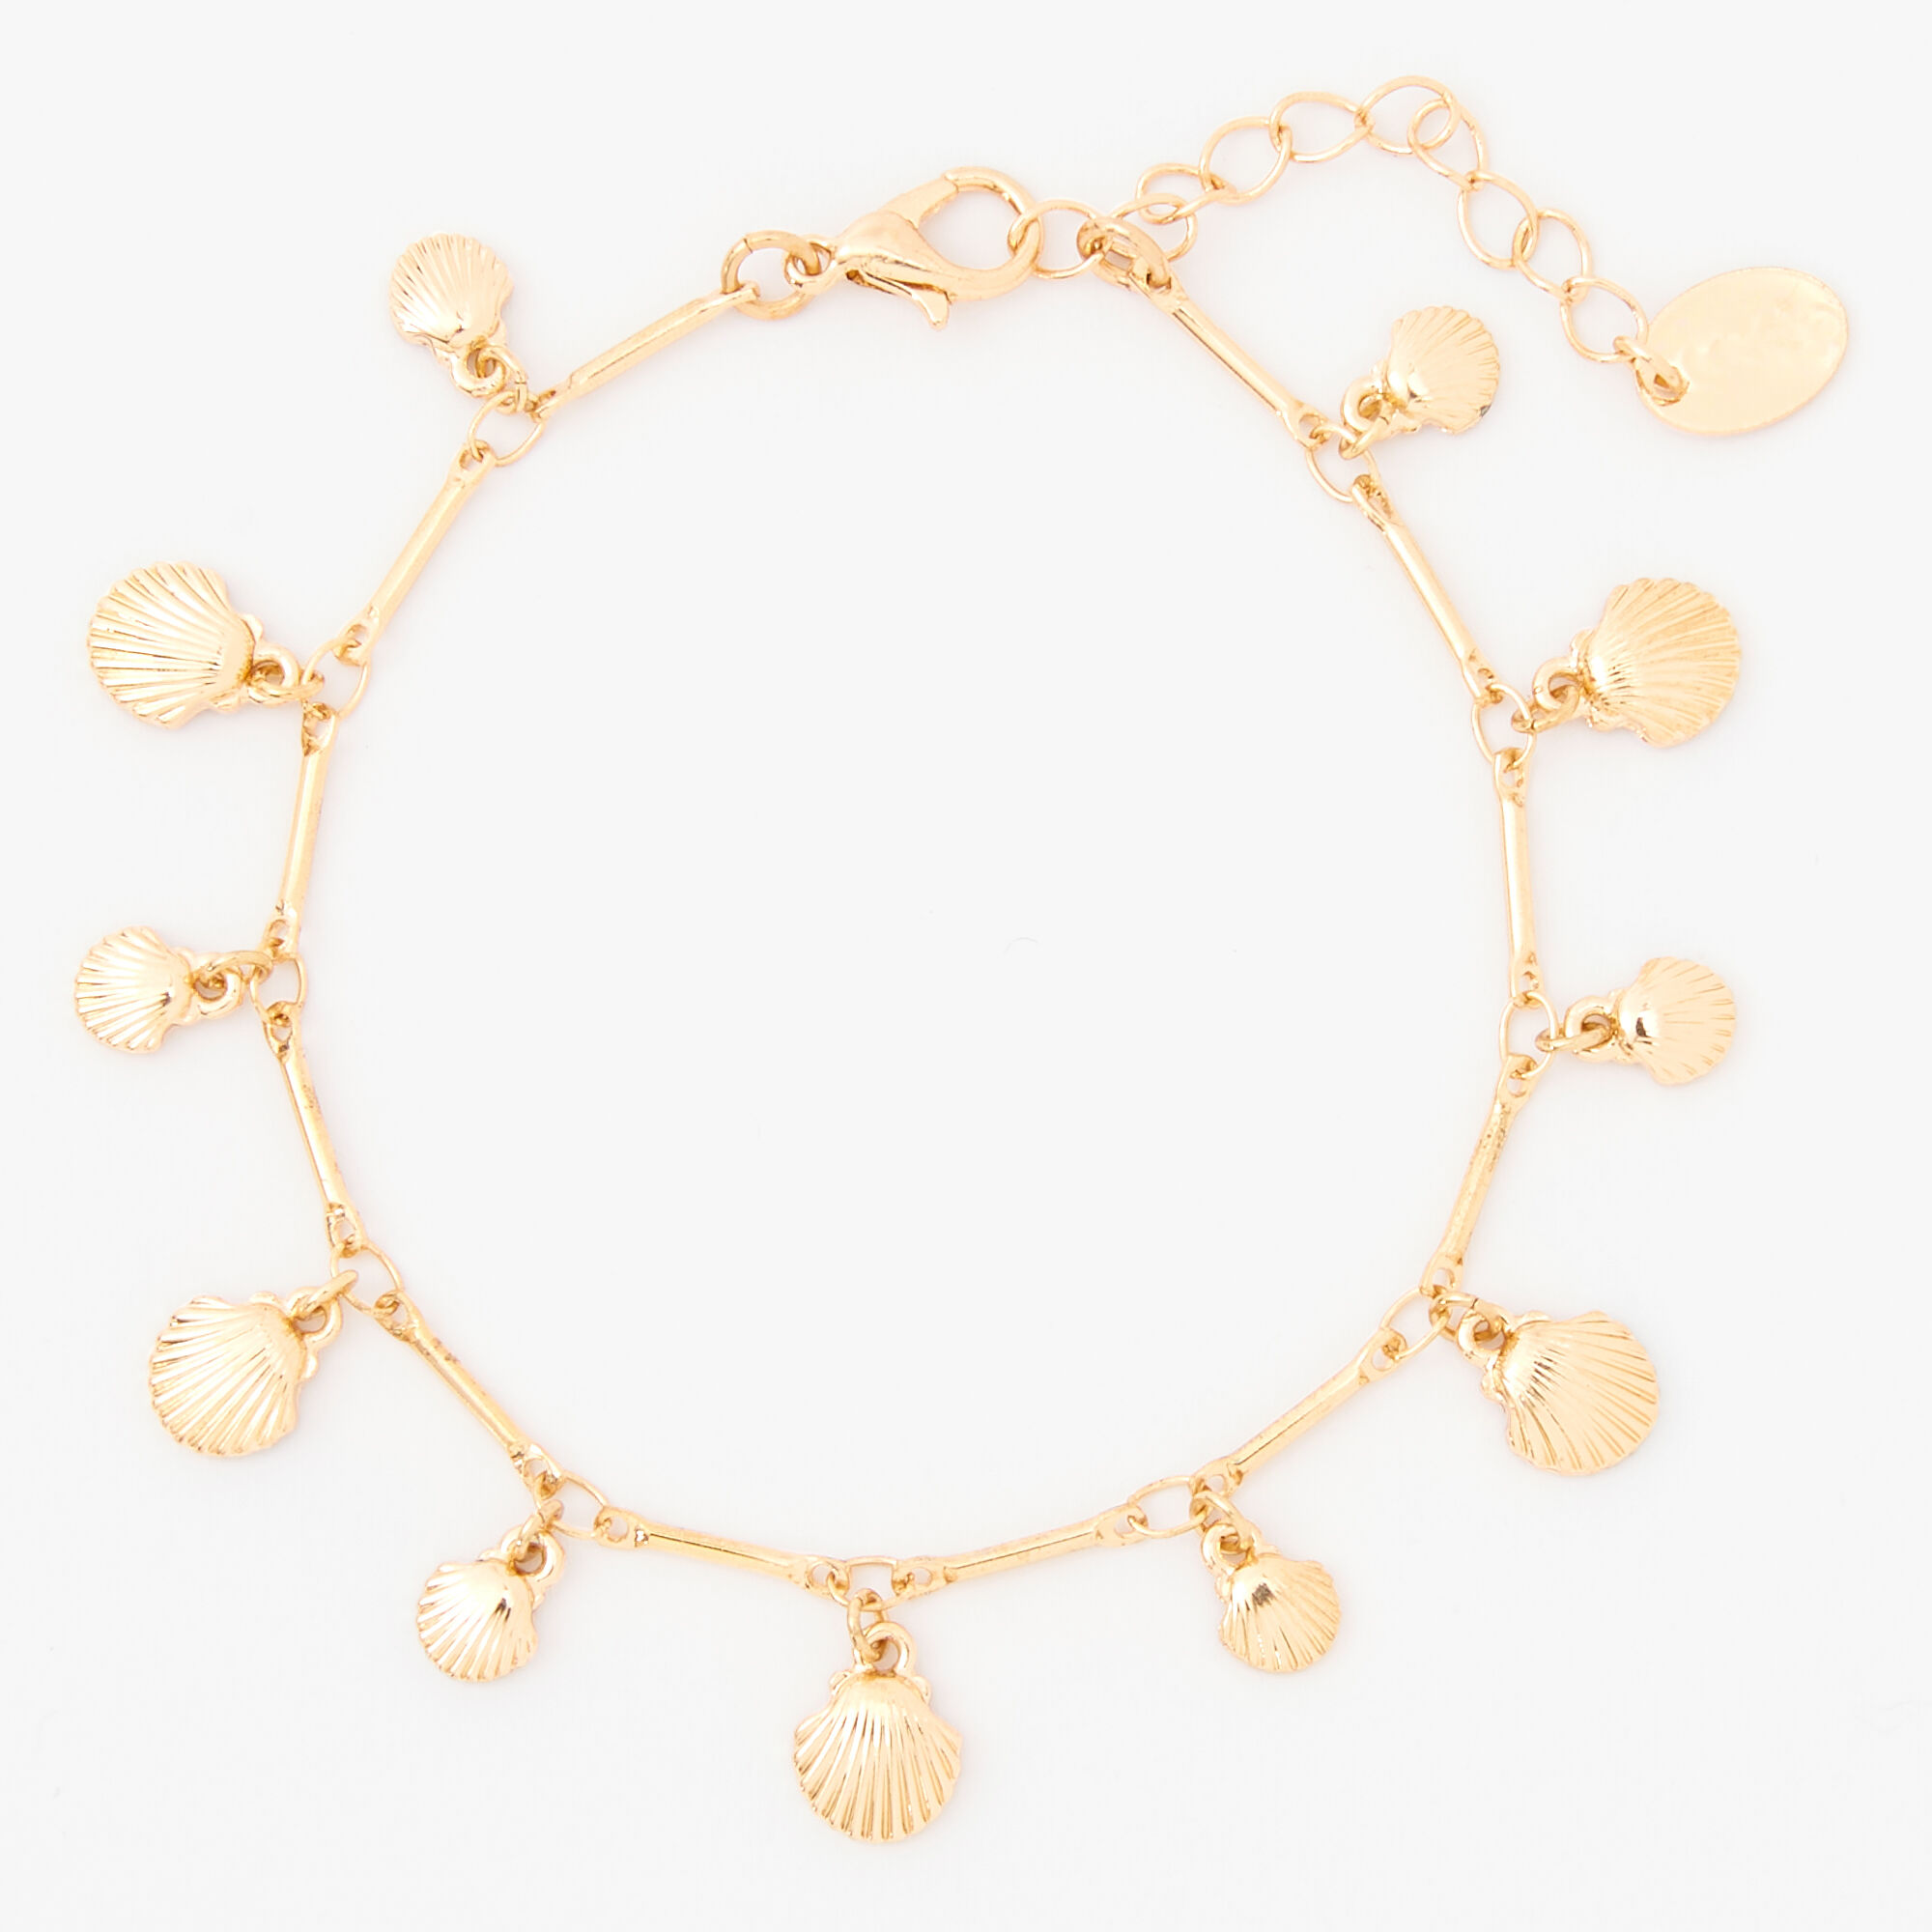 Snail Seashell Charms Bracelet in Solid Gold  Tales In Gold